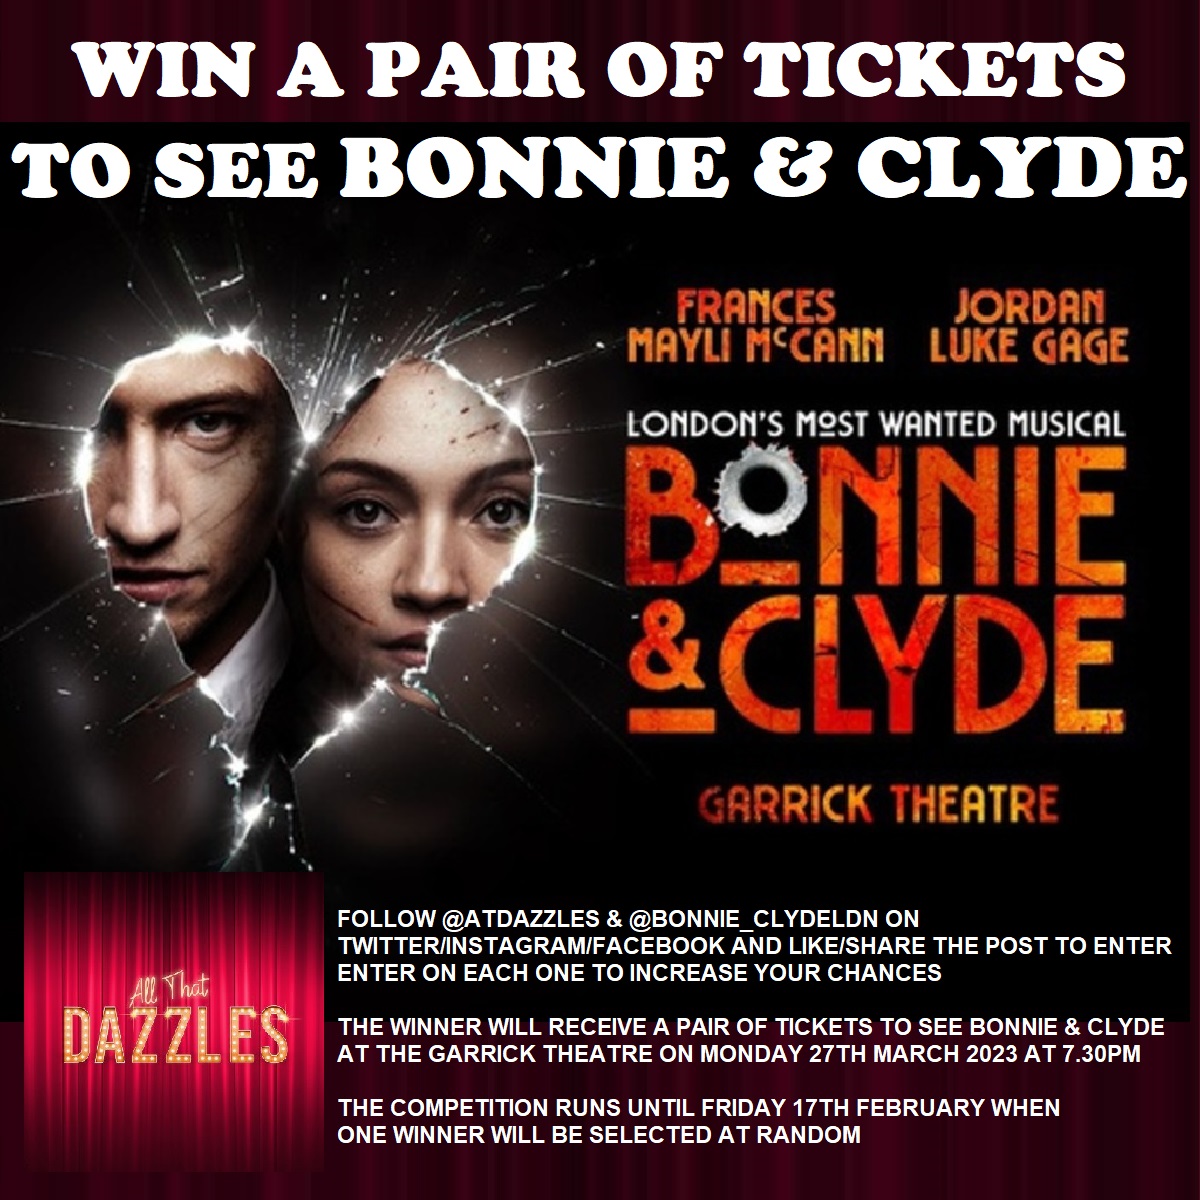 NEW GIVEAWAY ALERT I've teamed up with @Bonnie_clydeLDN to offer a pair of tickets to see the show on 27th March. To enter like or retweet this post. Reply saying who you'll bring if you win You must be following me to enter The winner will be randomly picked on 17th February.